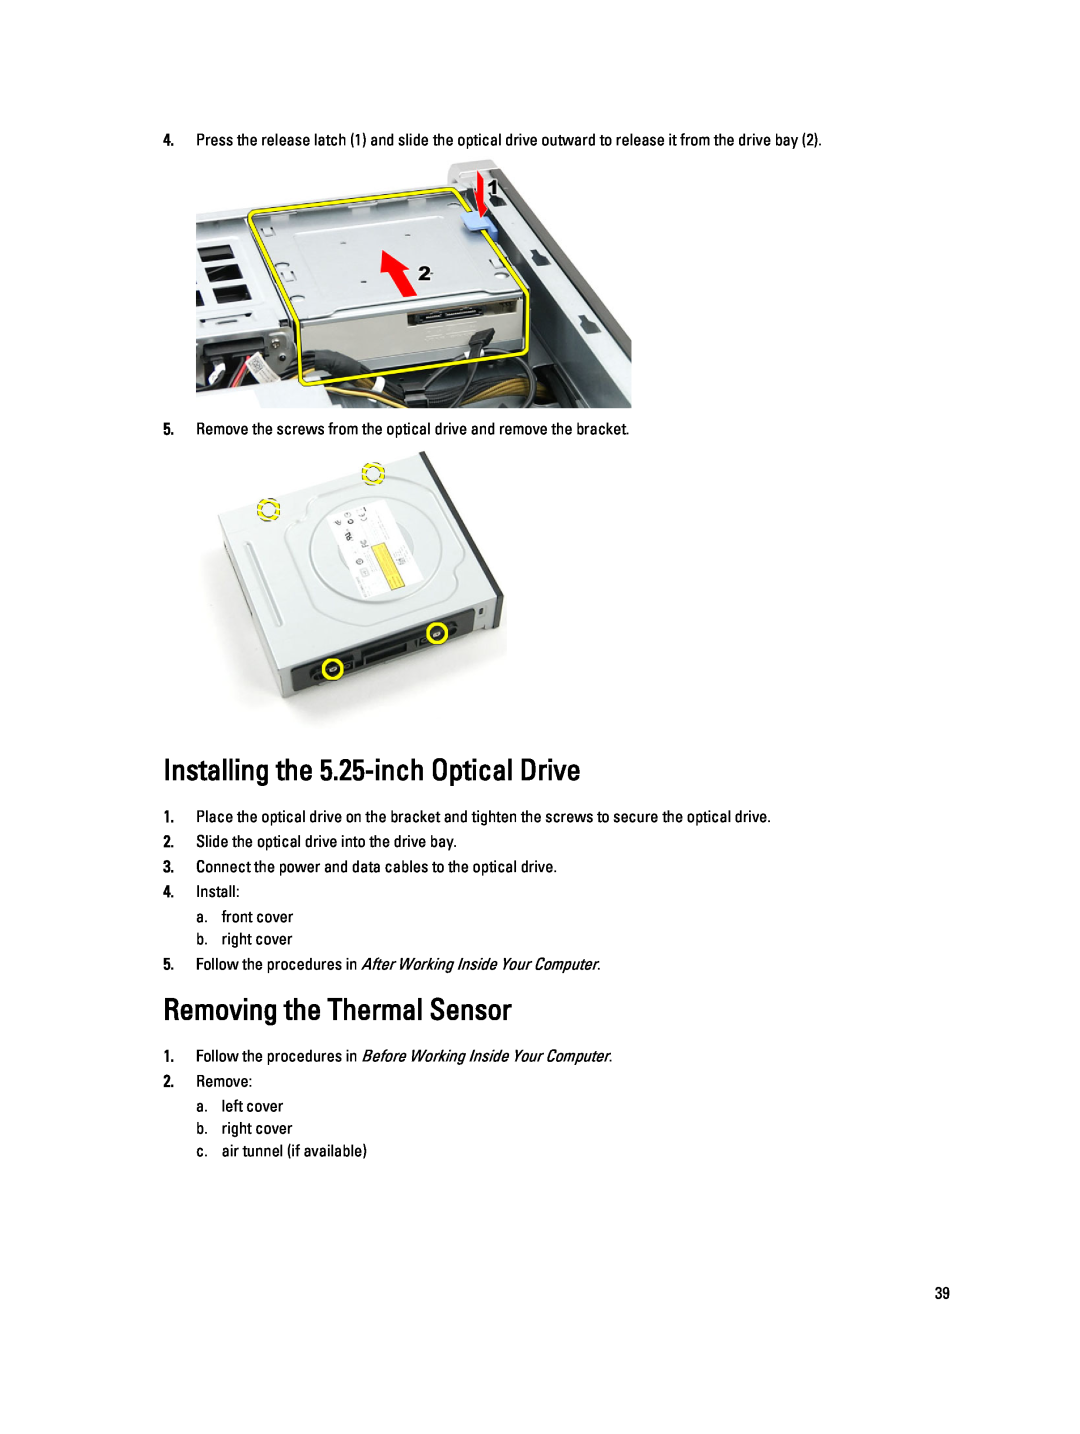 Dell T7610 owner manual Installing the 5.25-inch Optical Drive, Removing the Thermal Sensor 